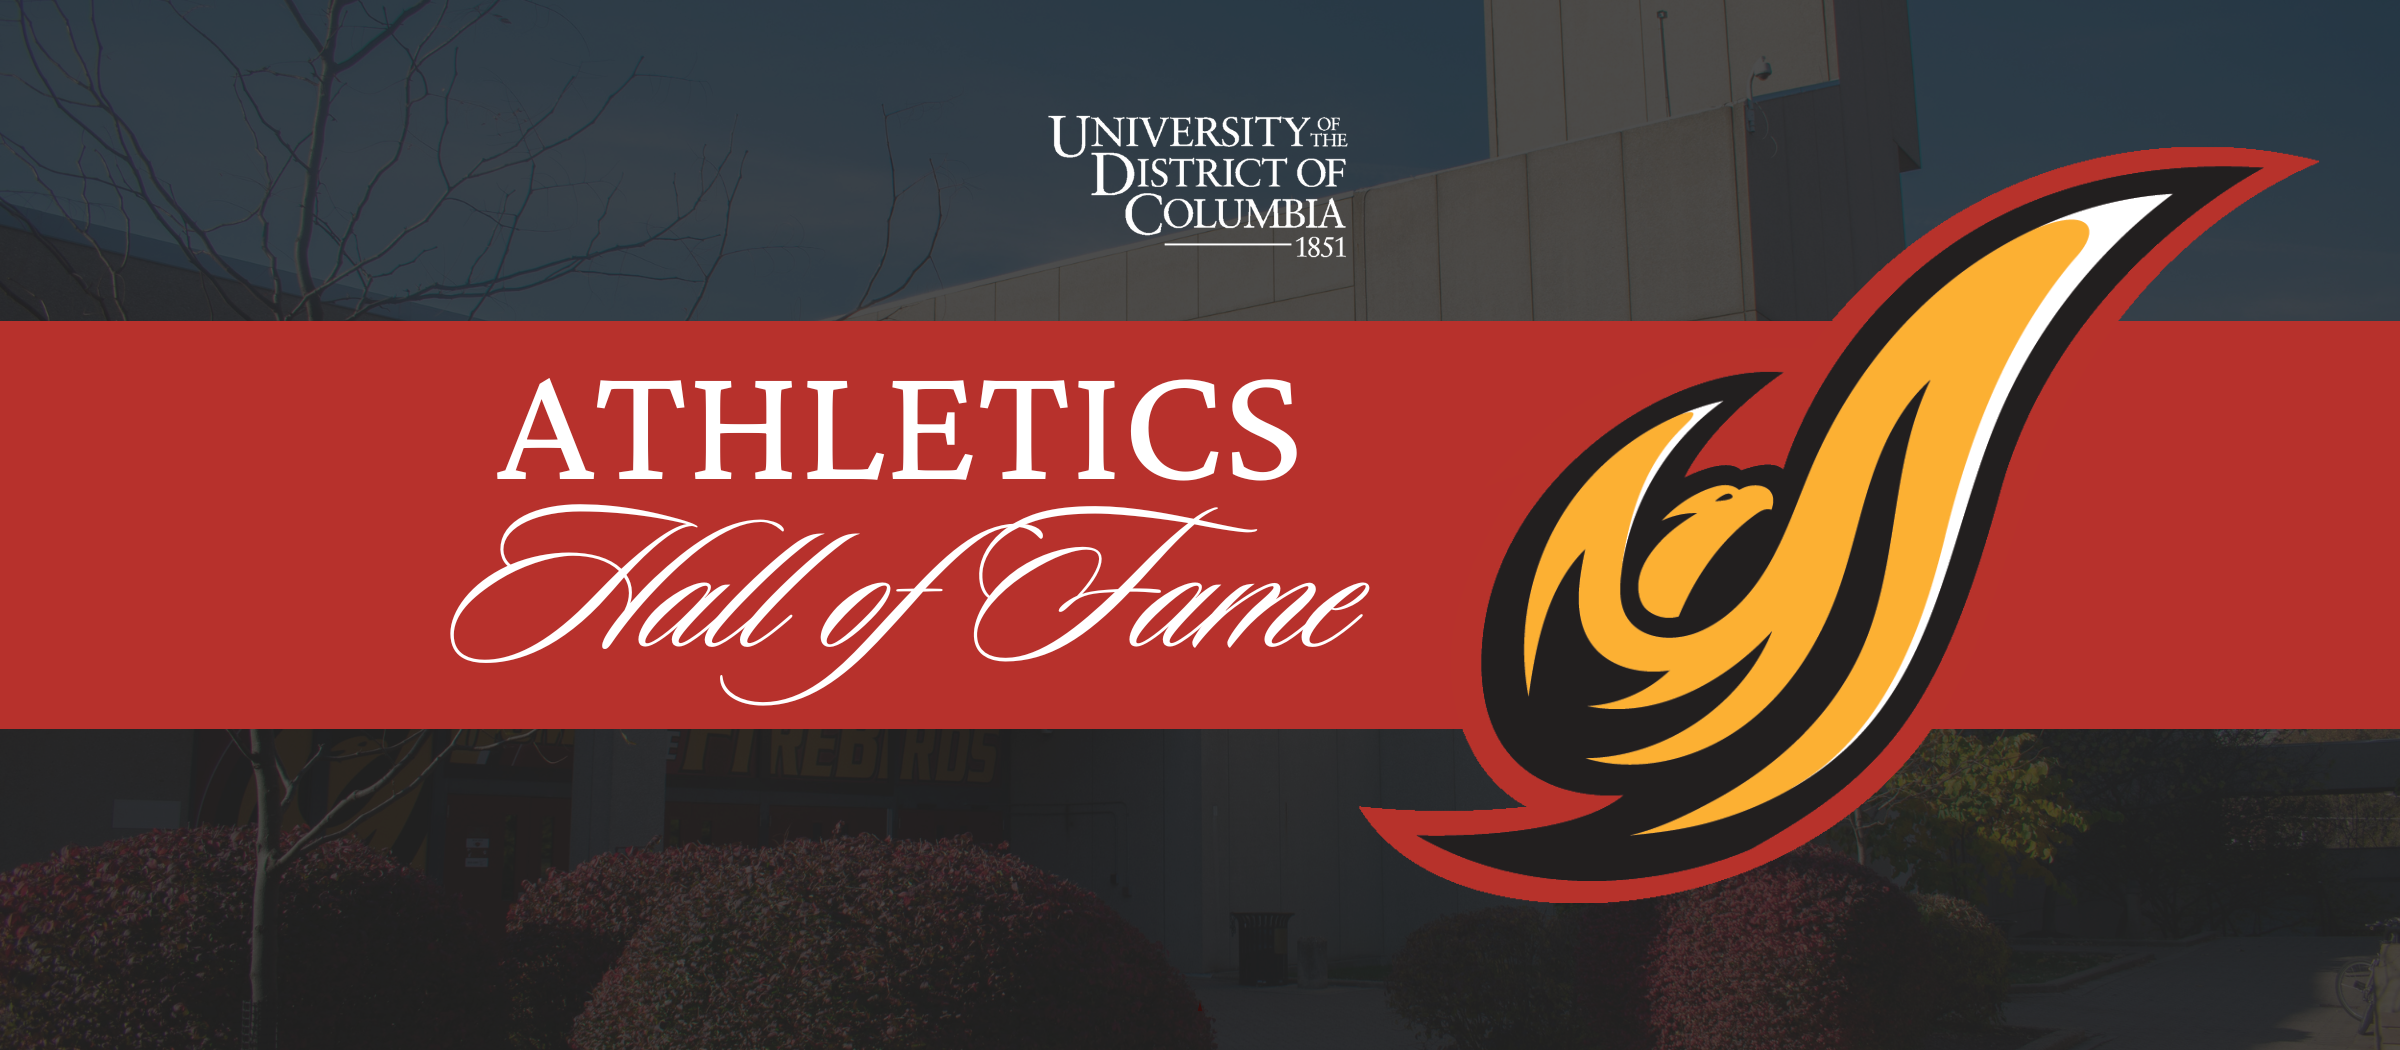 Save the Date: Athletics Hall of Fame Ceremony